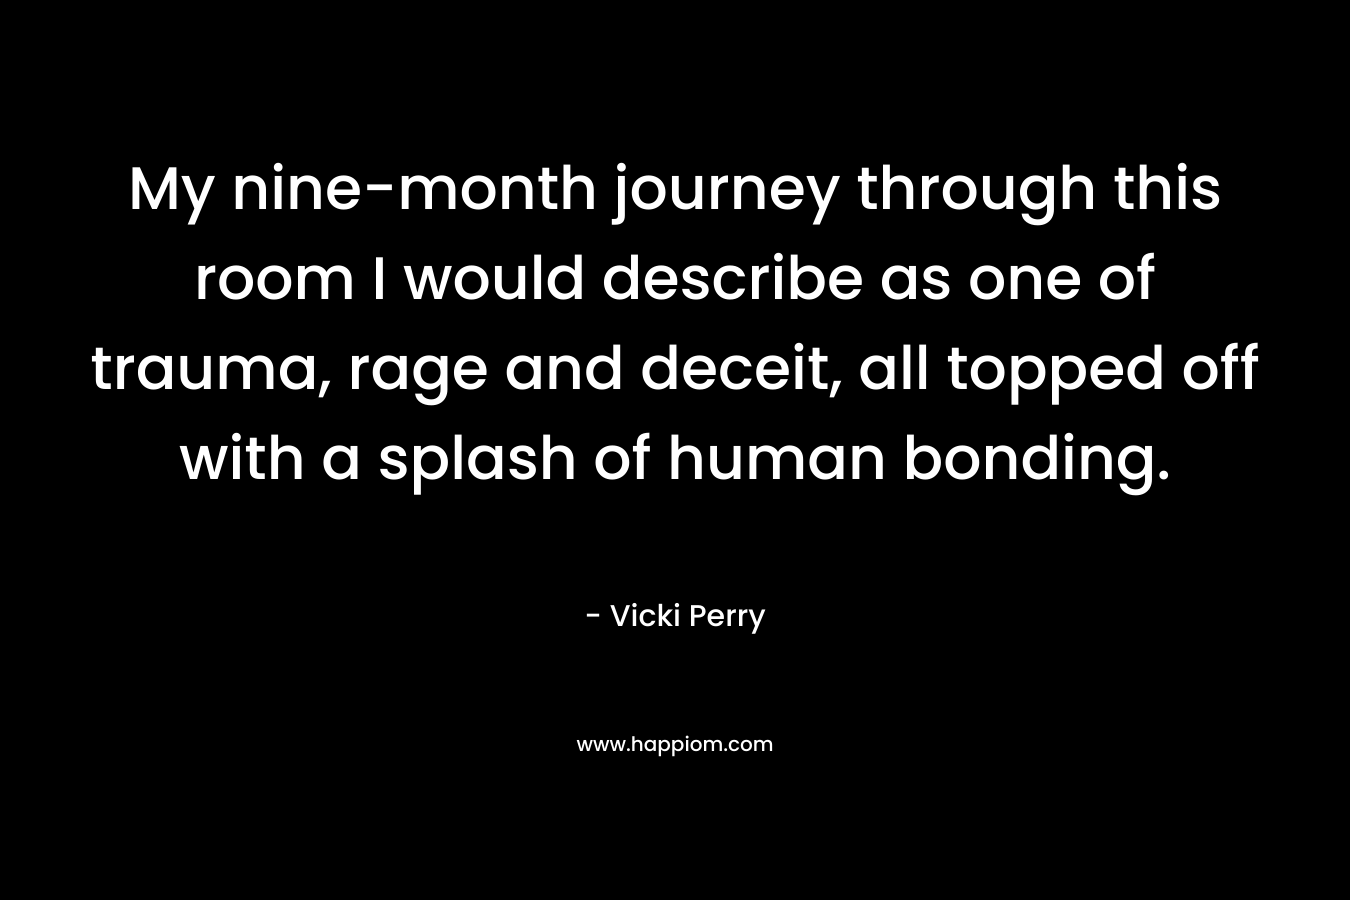 My nine-month journey through this room I would describe as one of trauma, rage and deceit, all topped off with a splash of human bonding. – Vicki Perry